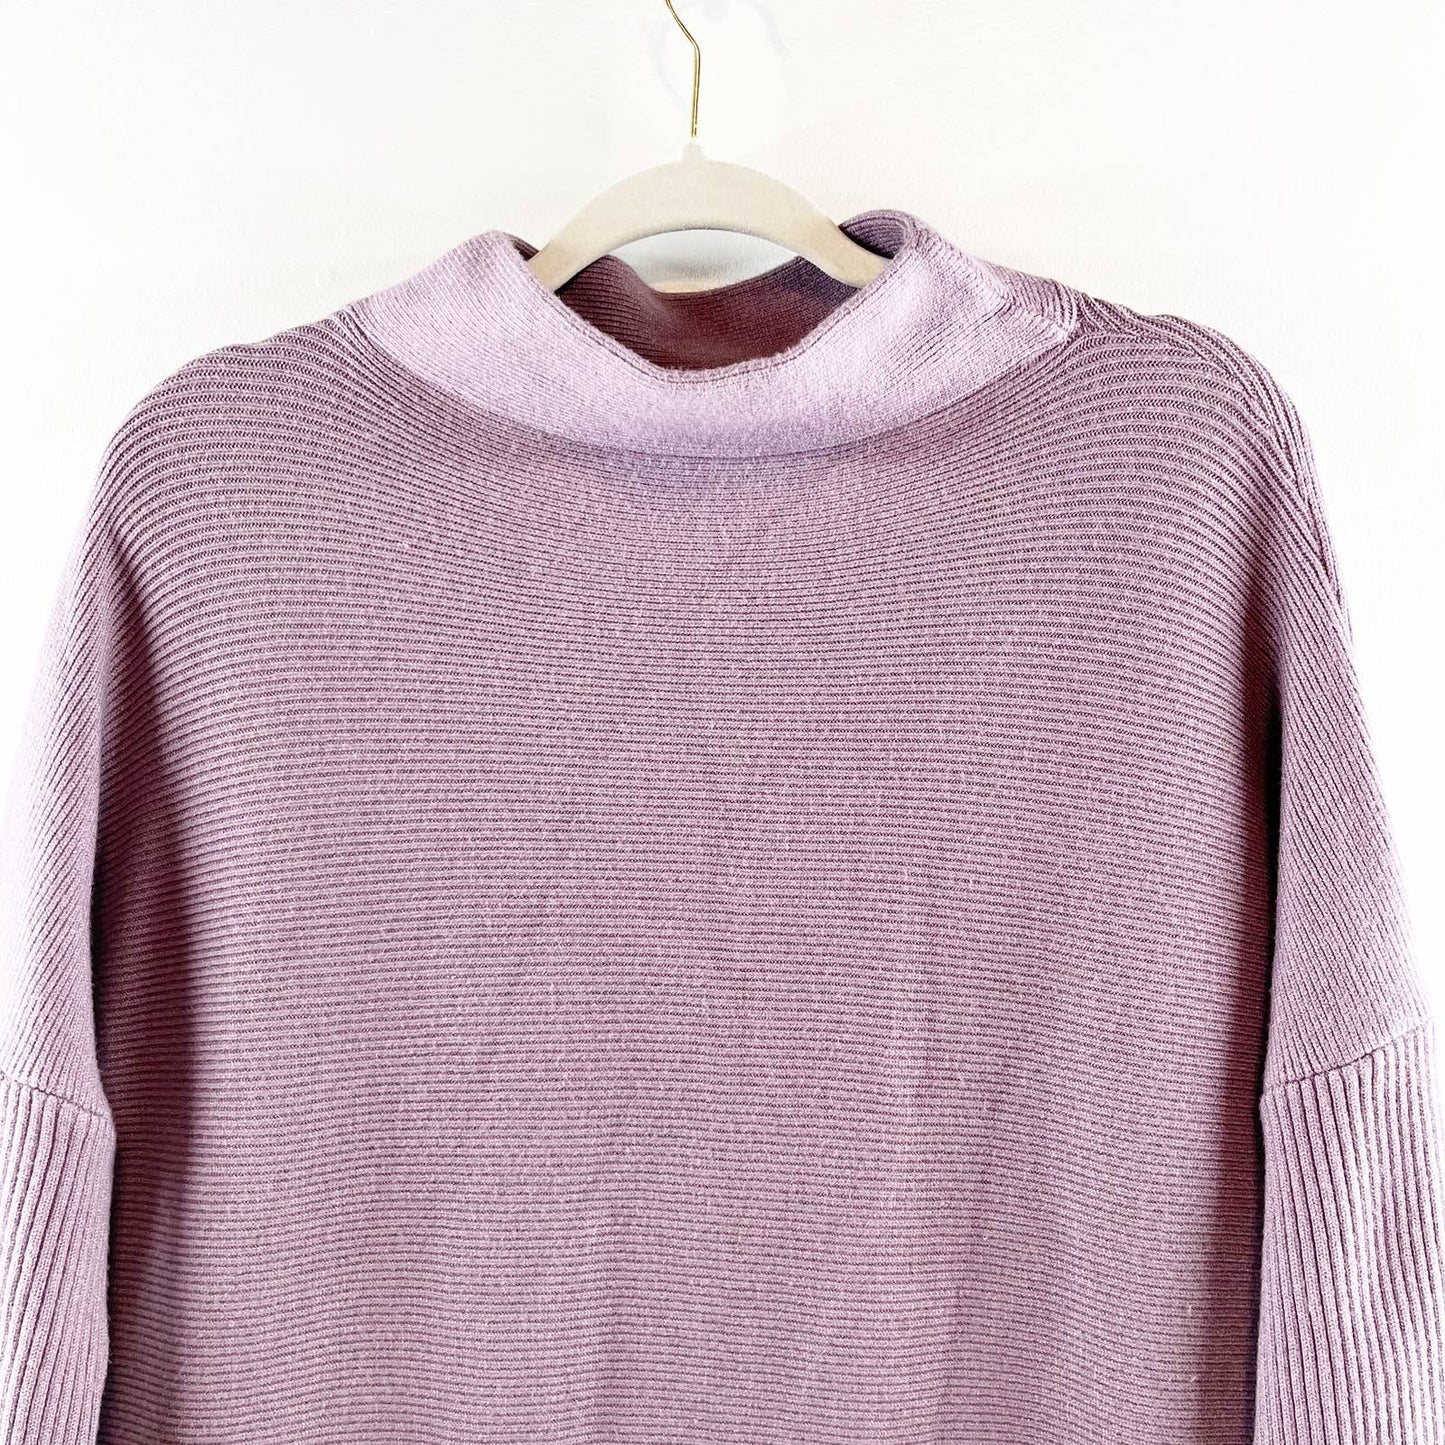 Long Sleeve Slouchy Side Slit Turtleneck Pullover Tunic Sweater Purple Small